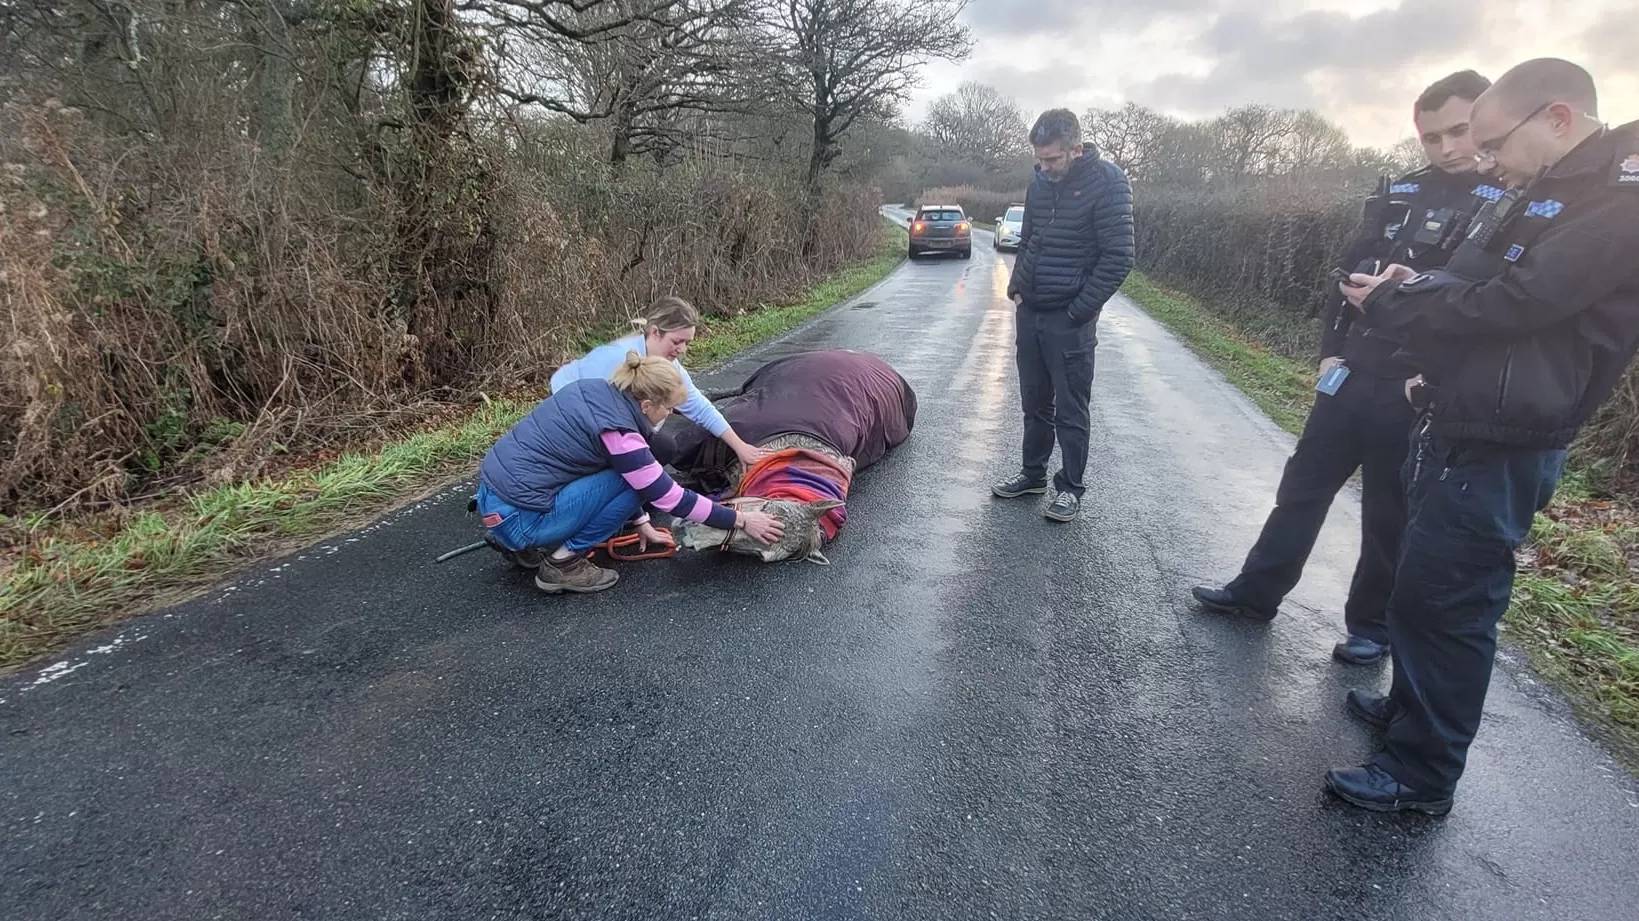 A horse collapsed on the road with its owner